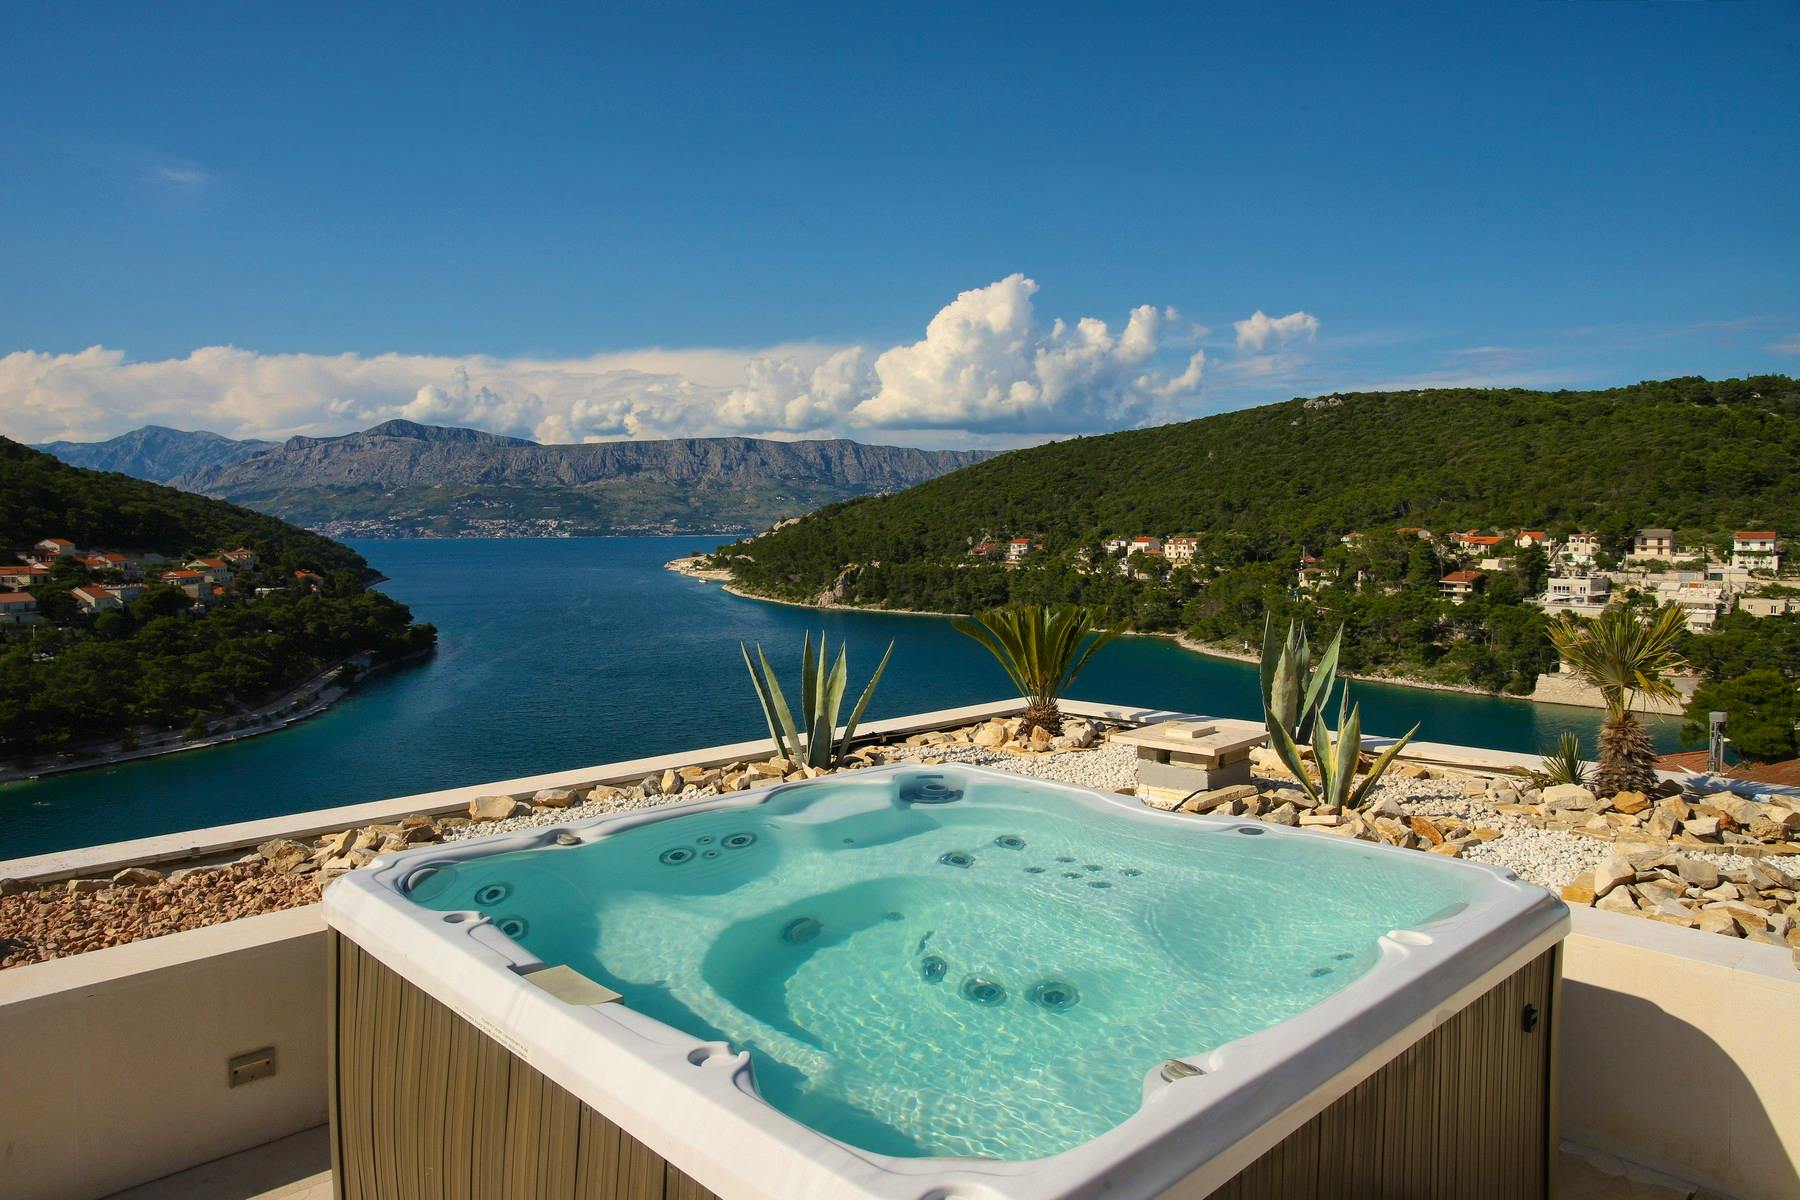 Roof terrace with Whirlpool tub and open sea view